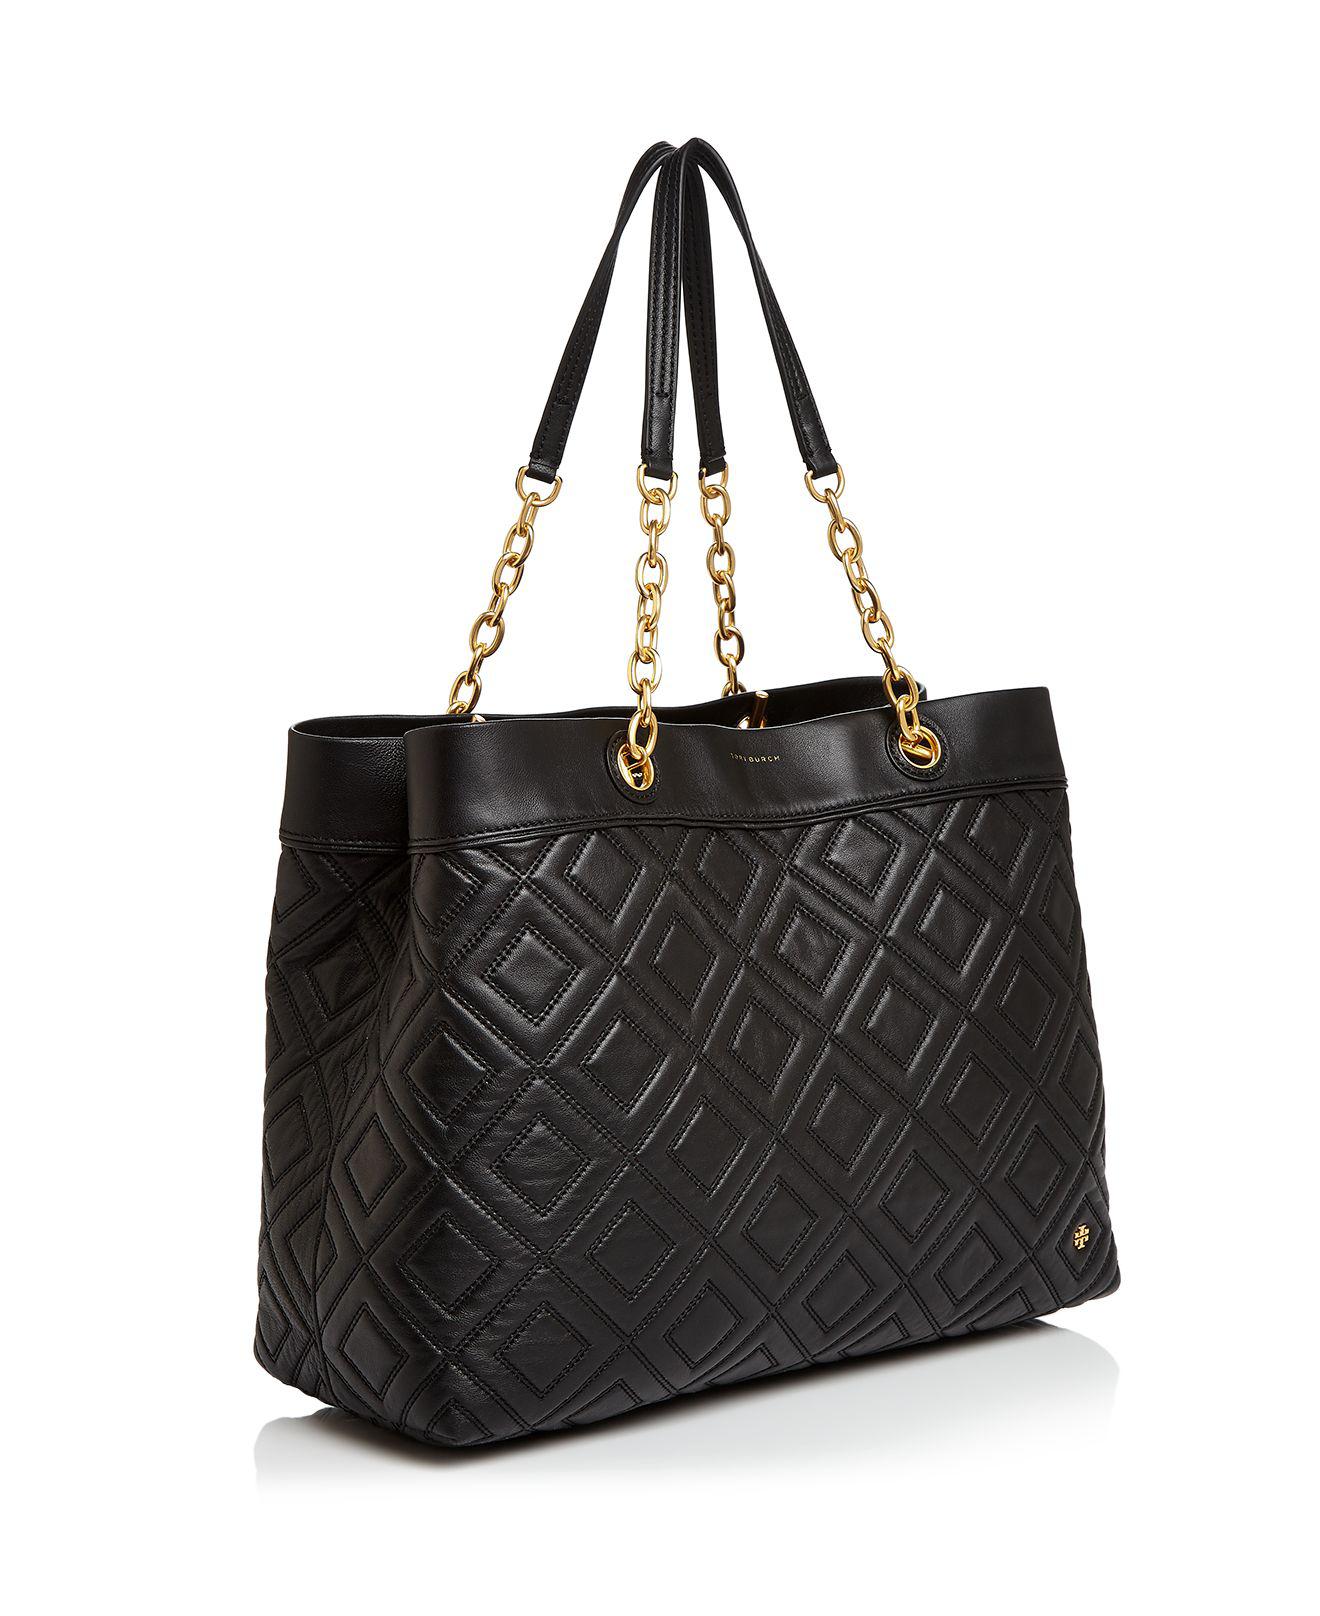 Tory Burch Louisa Quilted Leather Tote in Black - Lyst